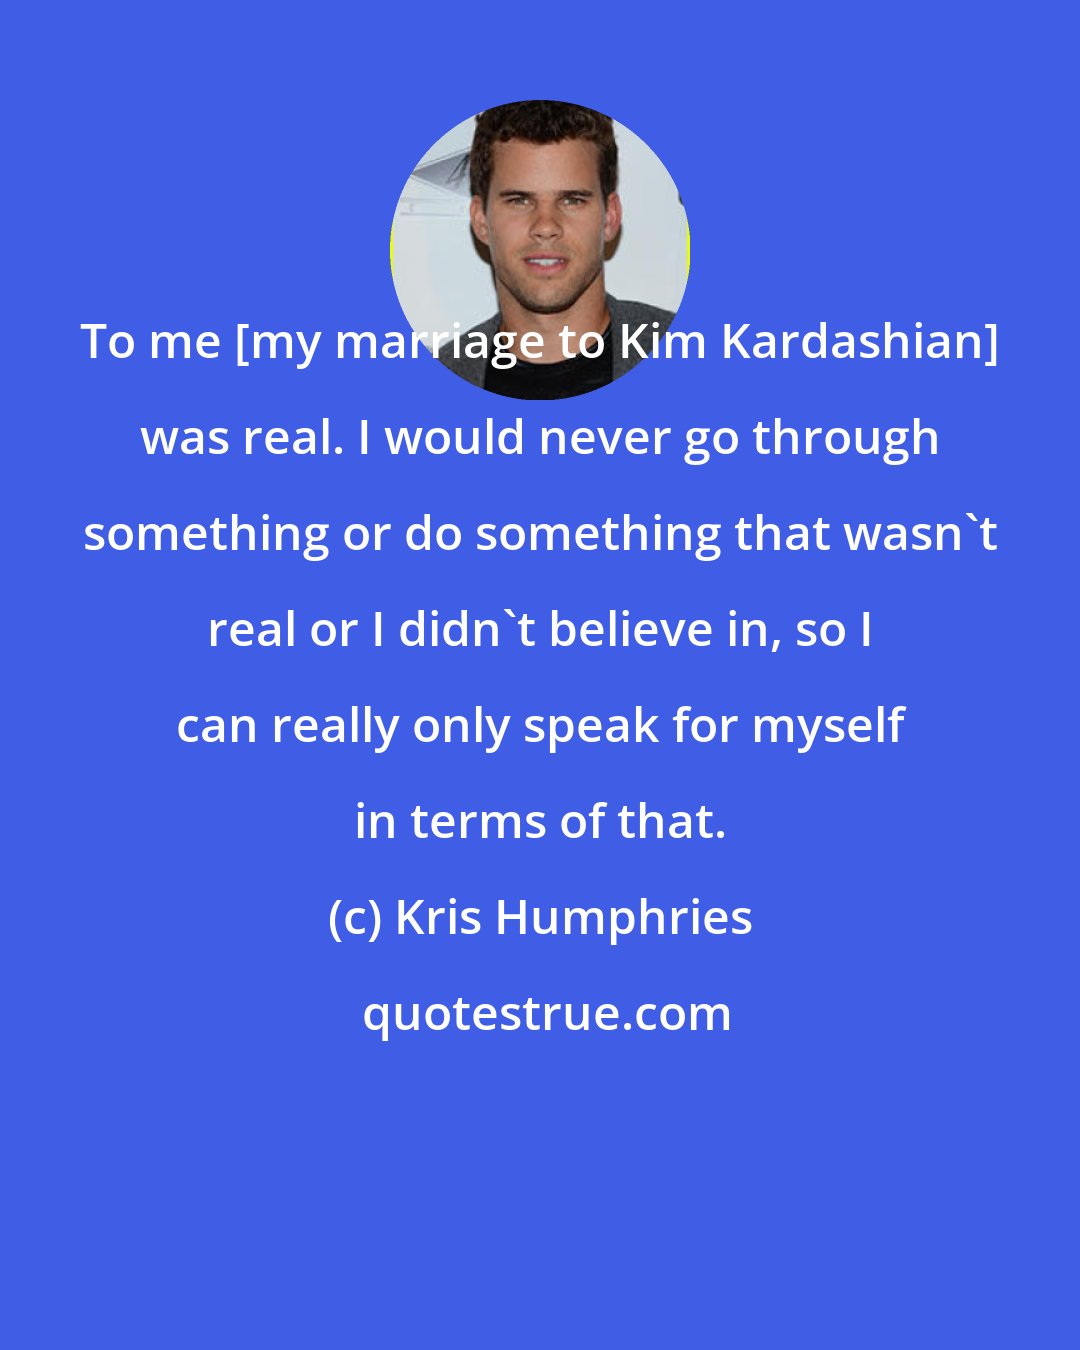 Kris Humphries: To me [my marriage to Kim Kardashian] was real. I would never go through something or do something that wasn't real or I didn't believe in, so I can really only speak for myself in terms of that.